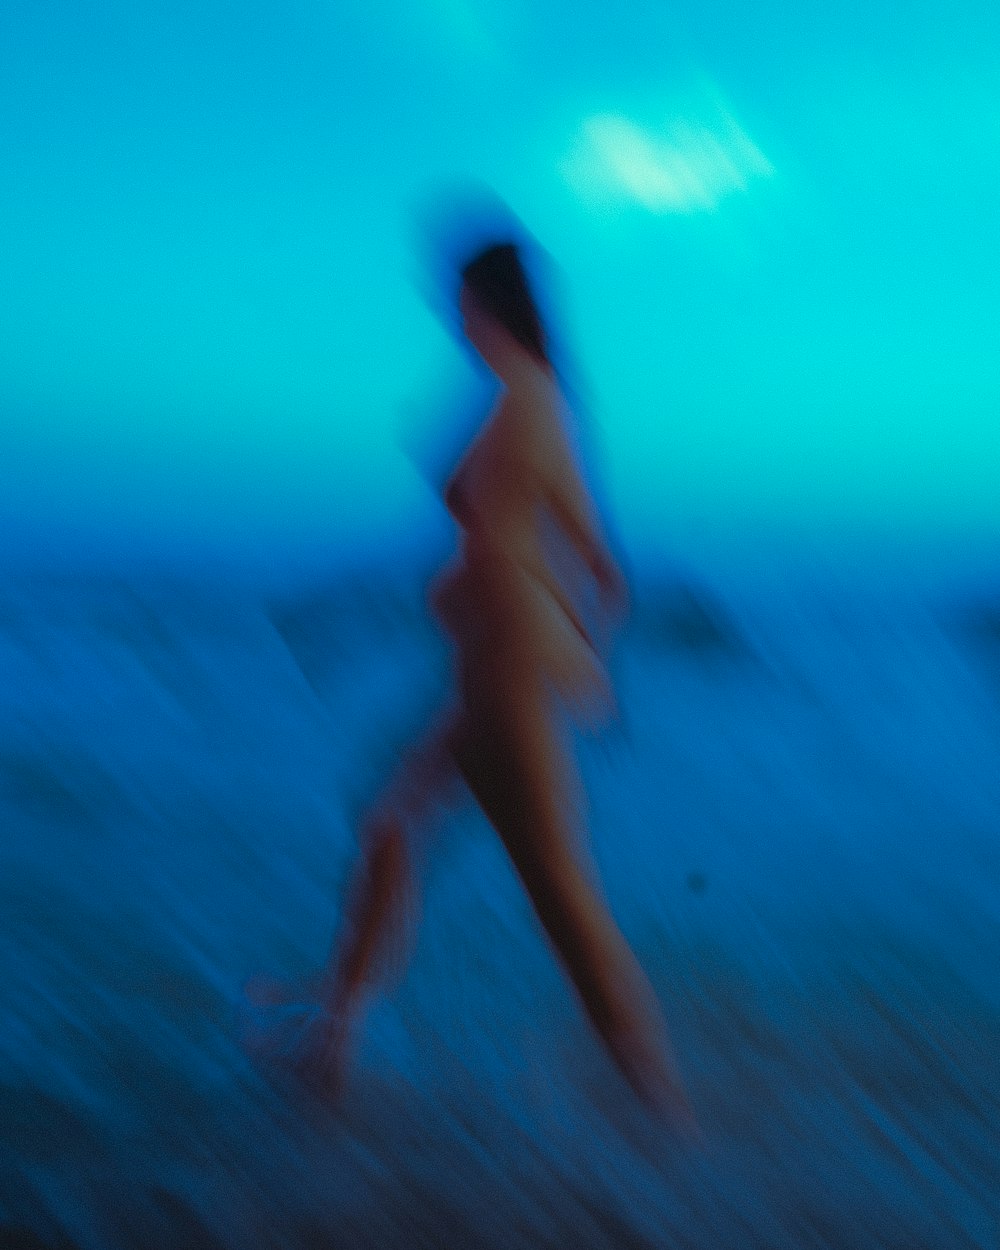 a blurry photo of a person running on the beach